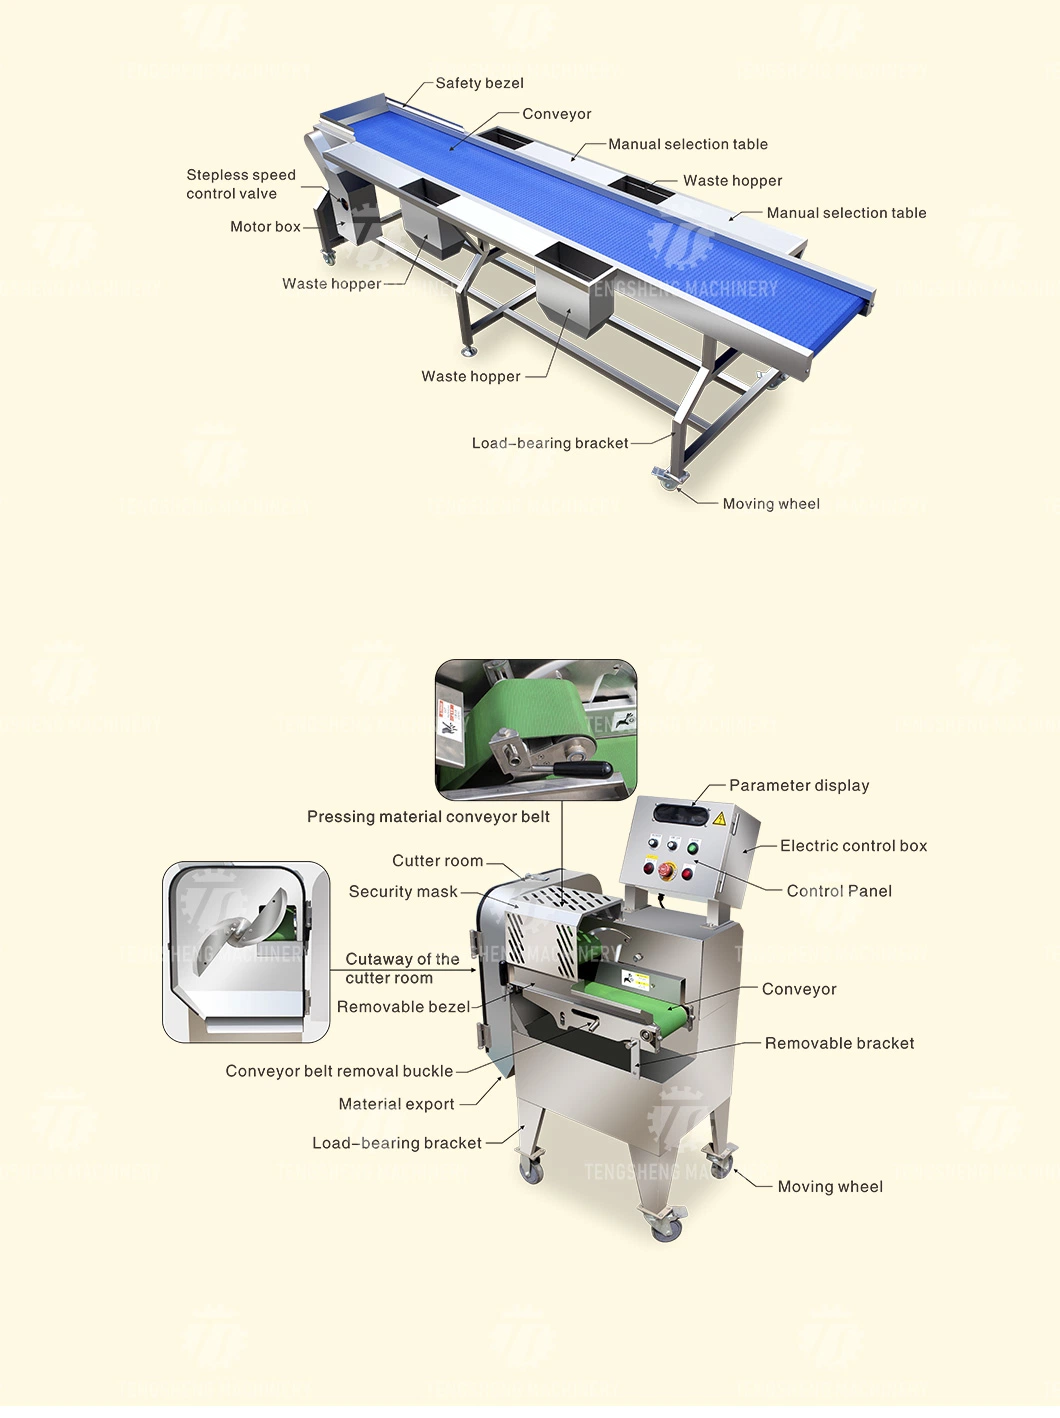 Multifunctional Food Vegetable Hair Roller Bubble Production Line Cleaning Selection and Cutting Machine